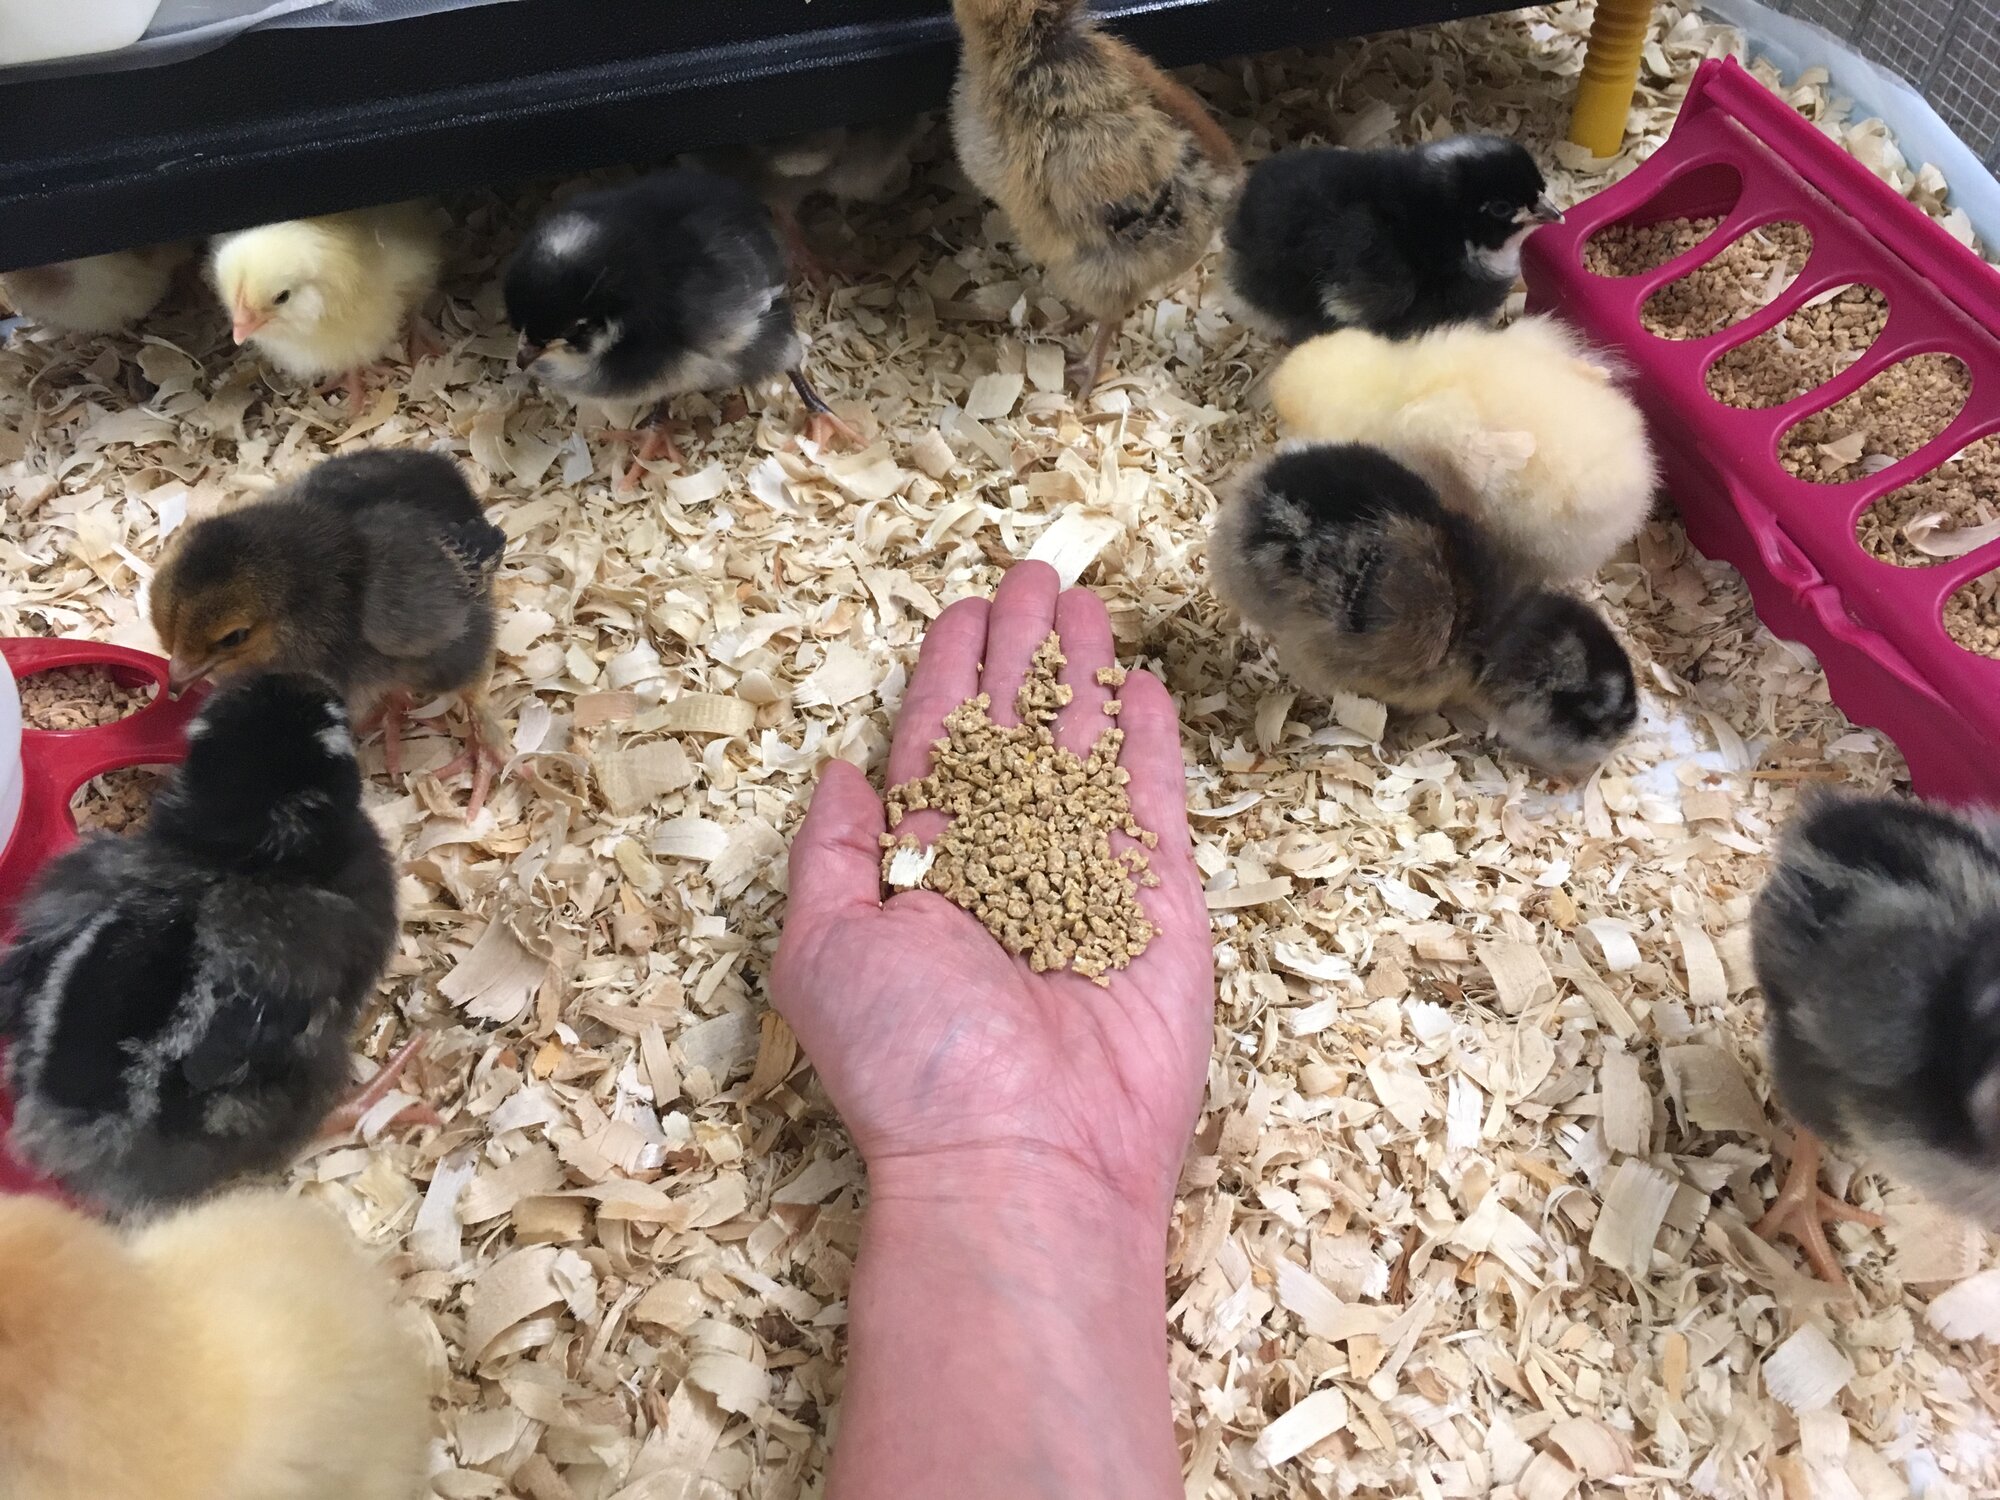 Chicks hatched May 13, 2019